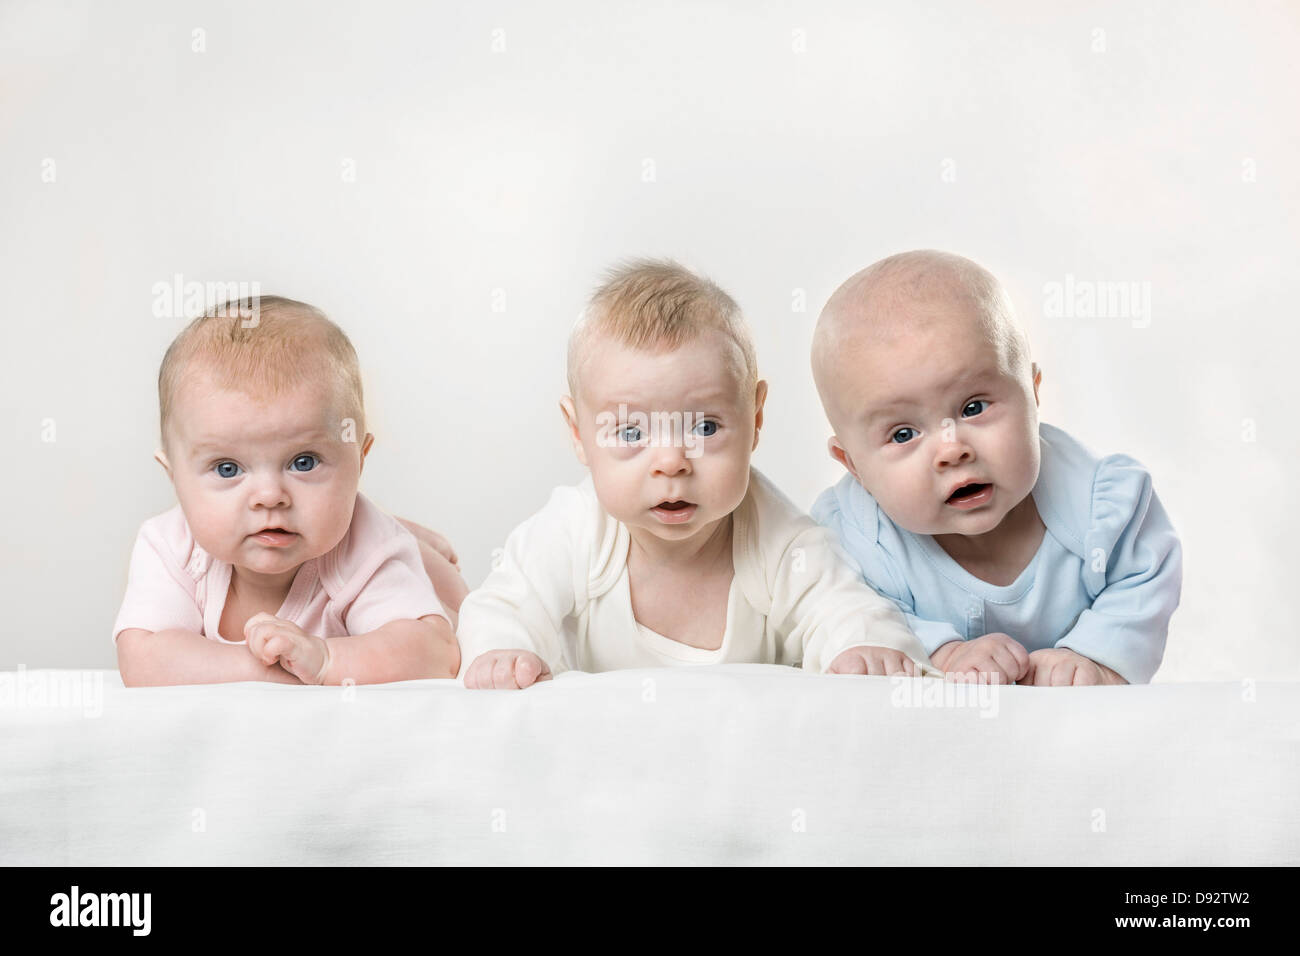 Three babies making funny faces Stock Photo